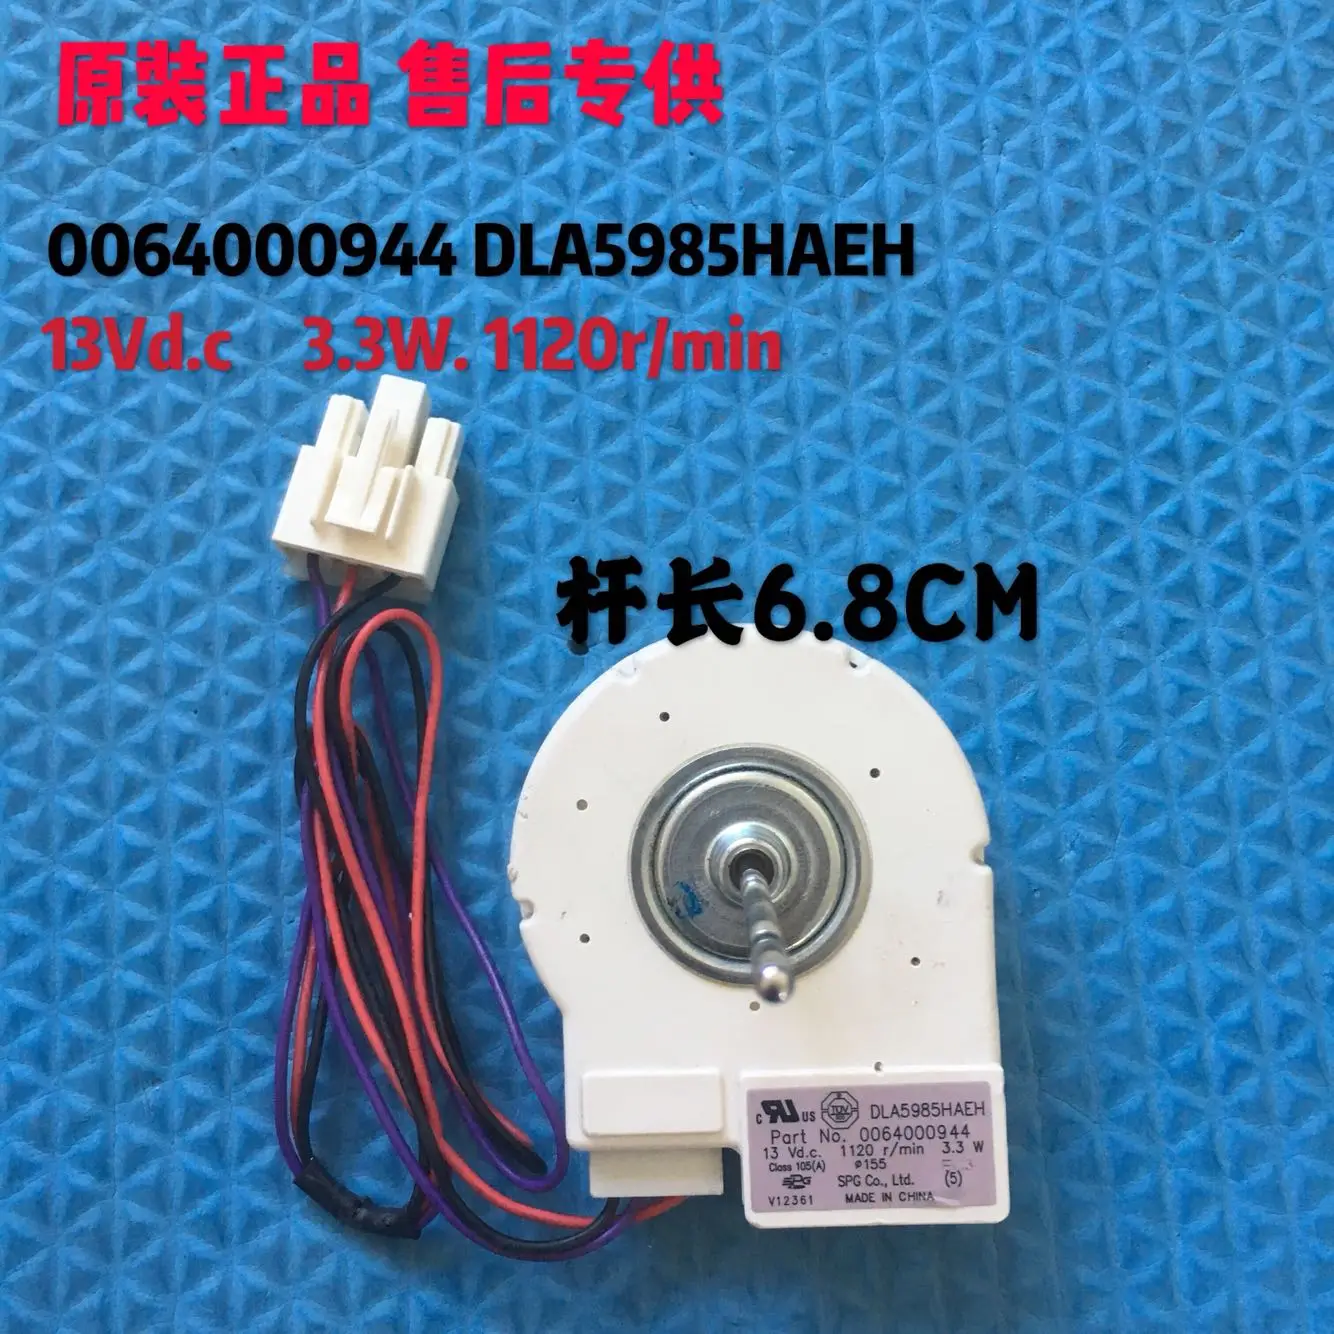 

Suitable for Haier Refrigerator Accessories Refrigeration Fan BCD-579WE DLA5985HAEH 0064000944 Motor